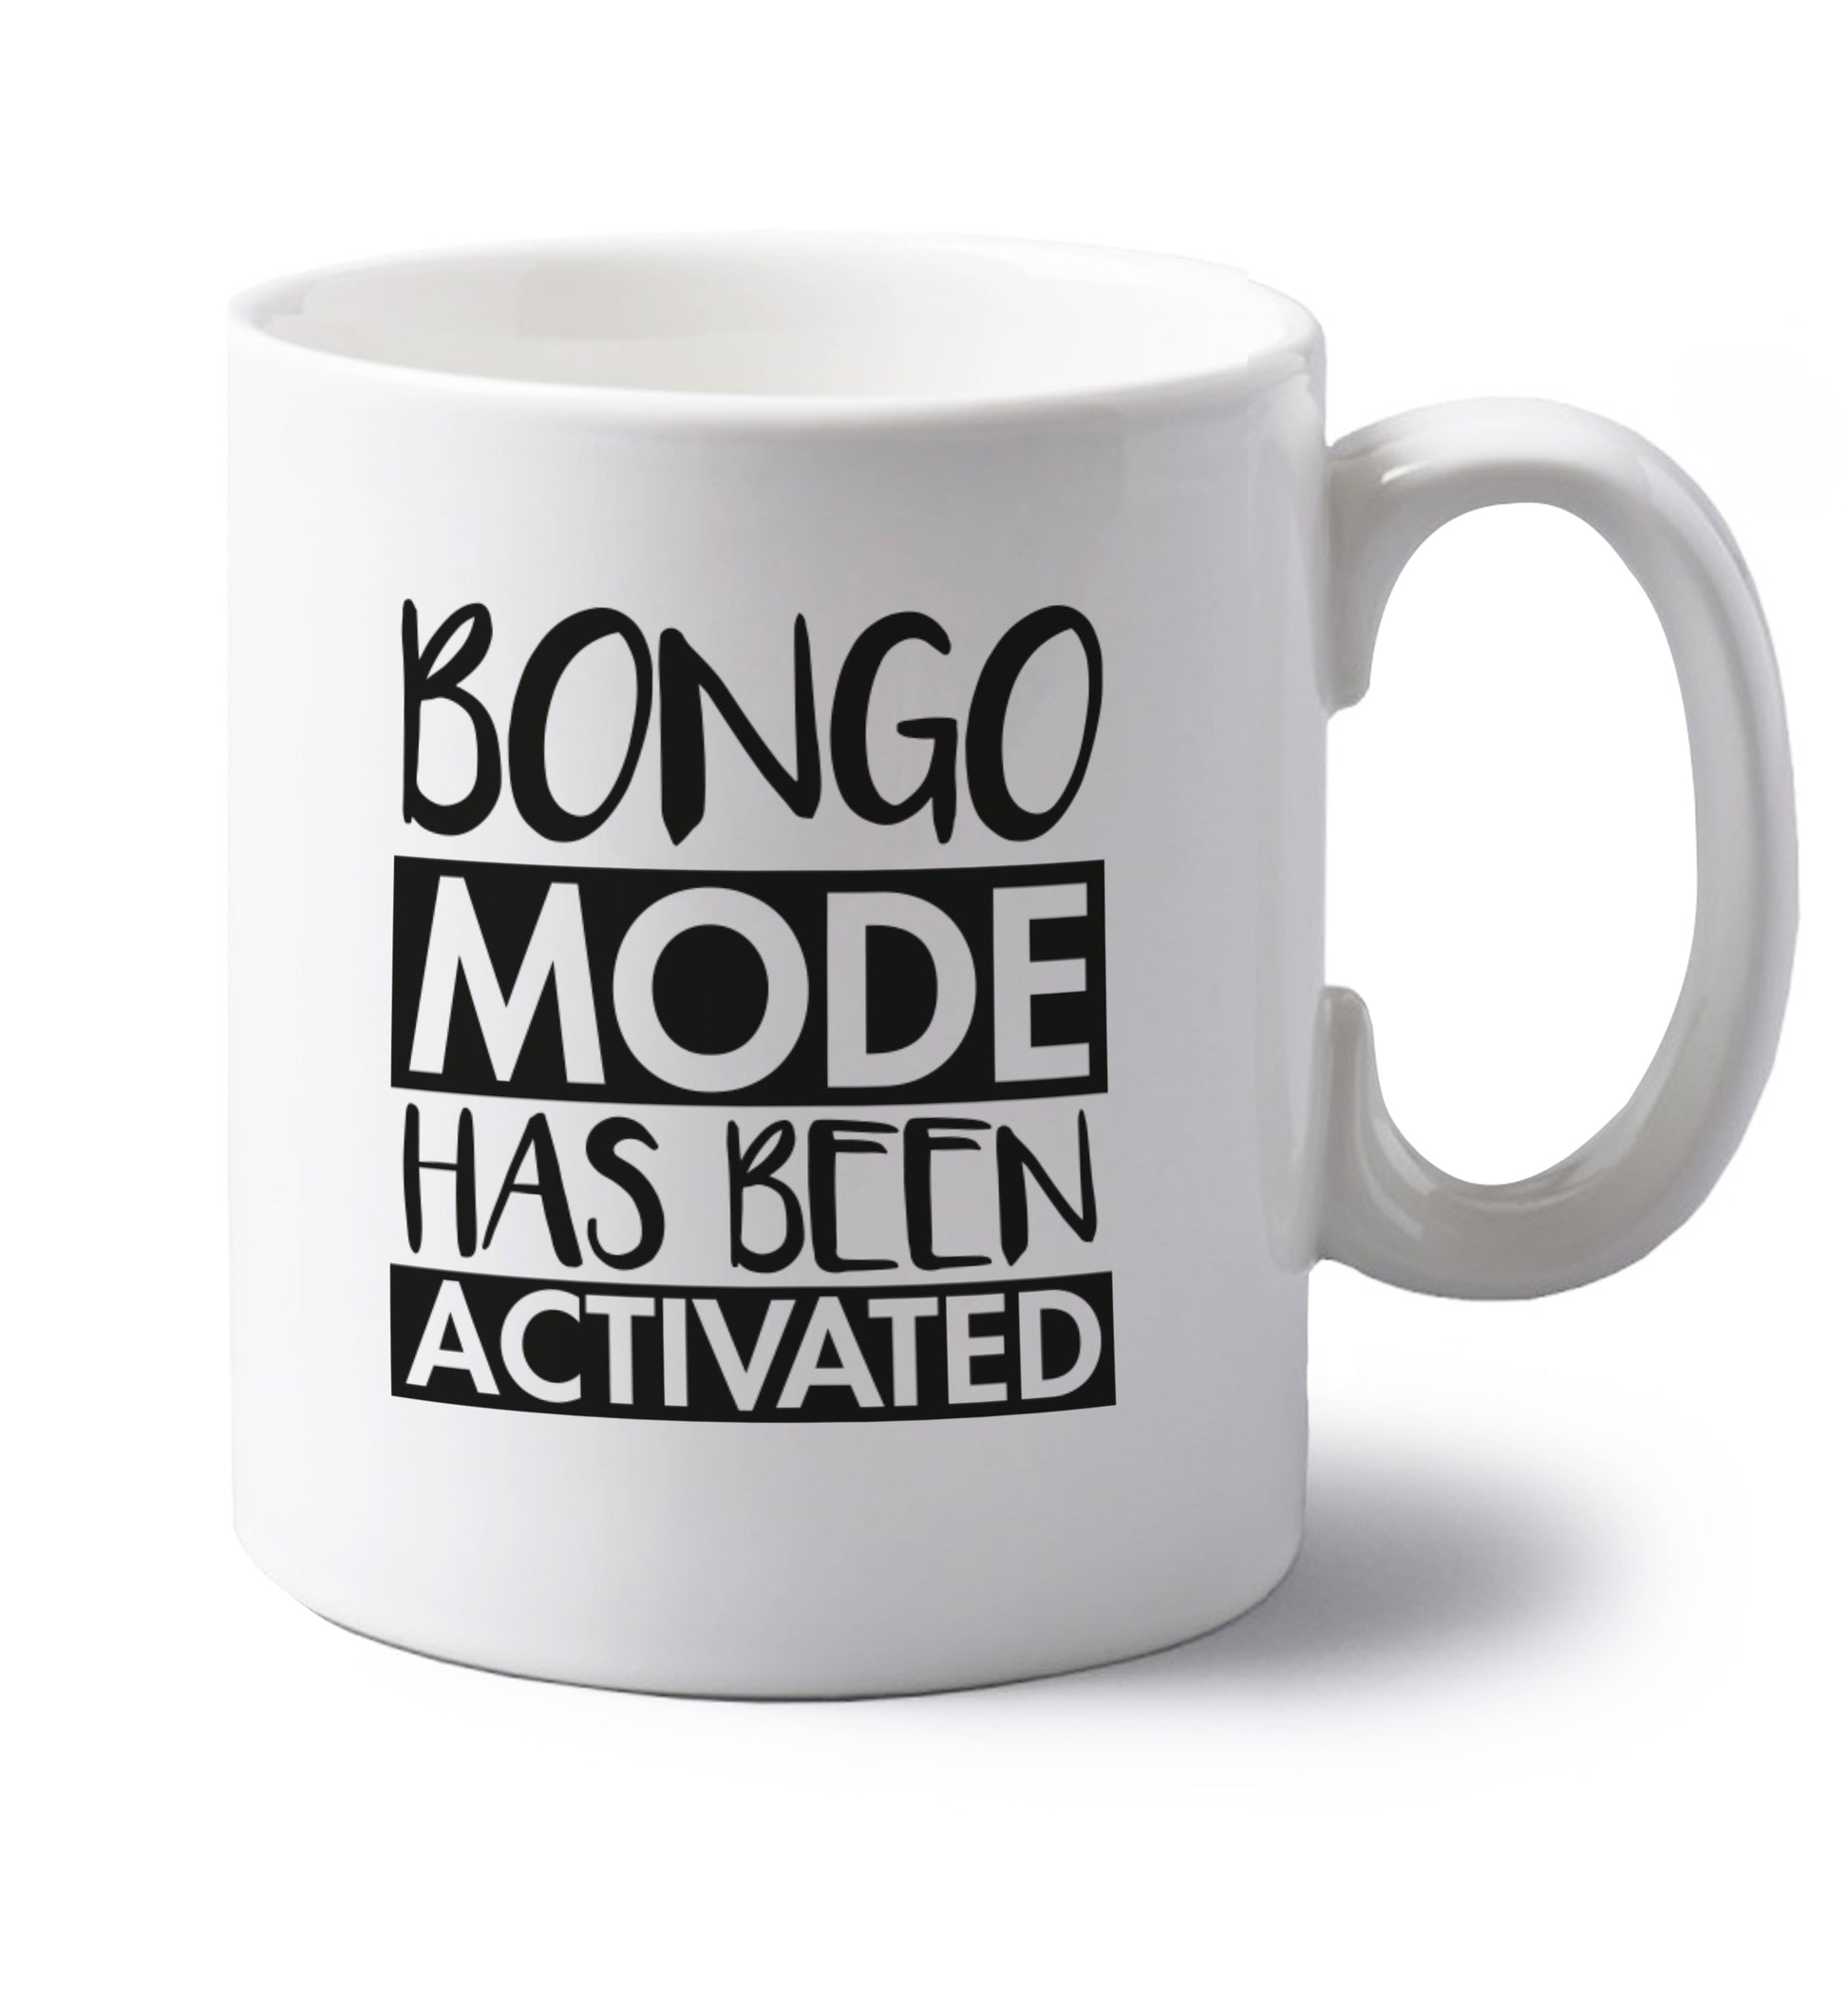 Bongo mode has been activated left handed white ceramic mug 